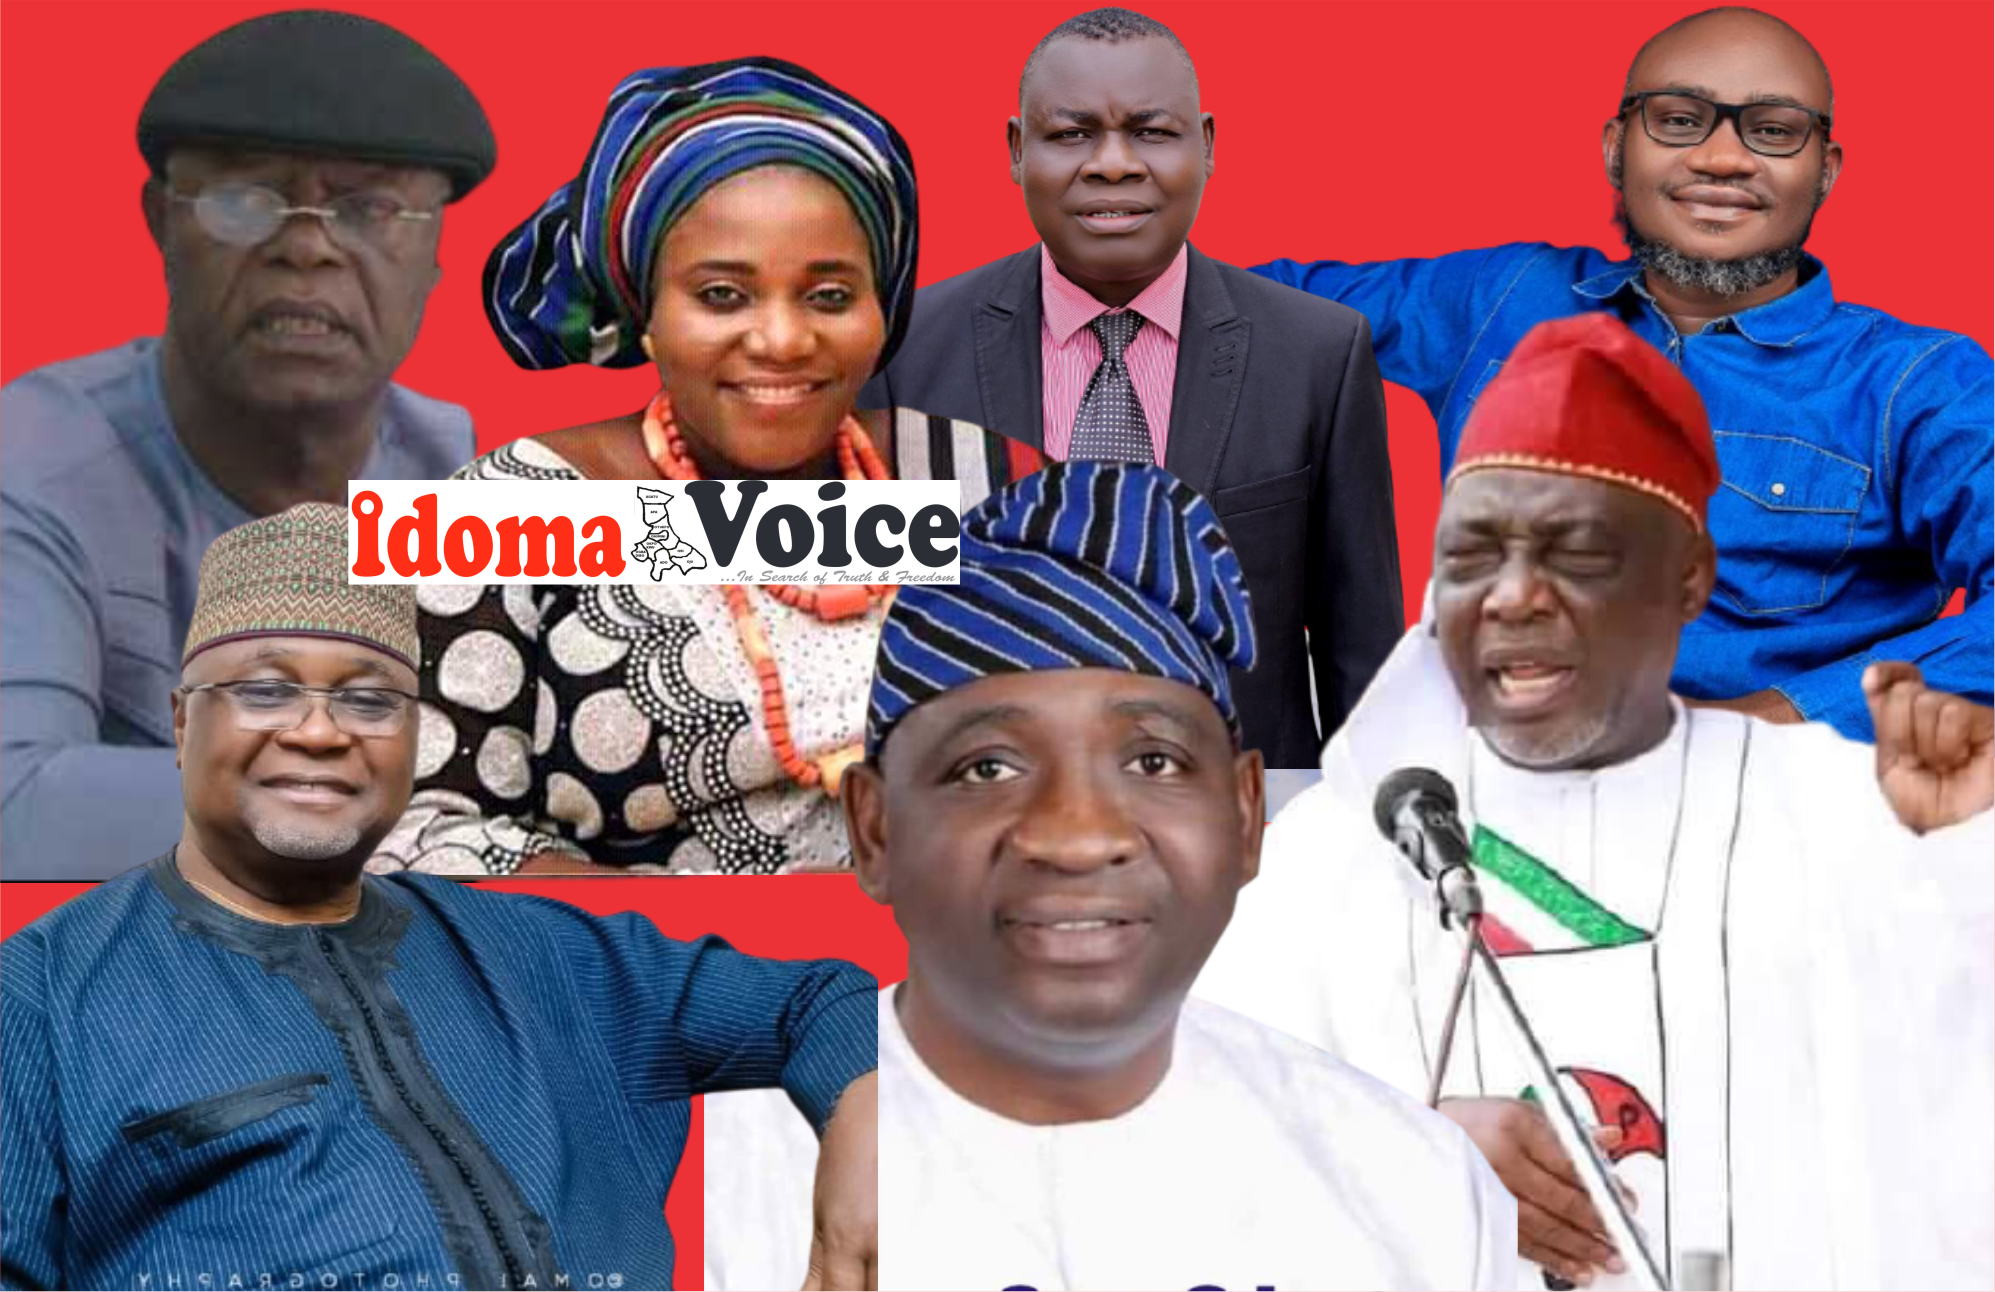 Power shift 2023: Top 7 Idoma politicians tipped for Benue governorship seat